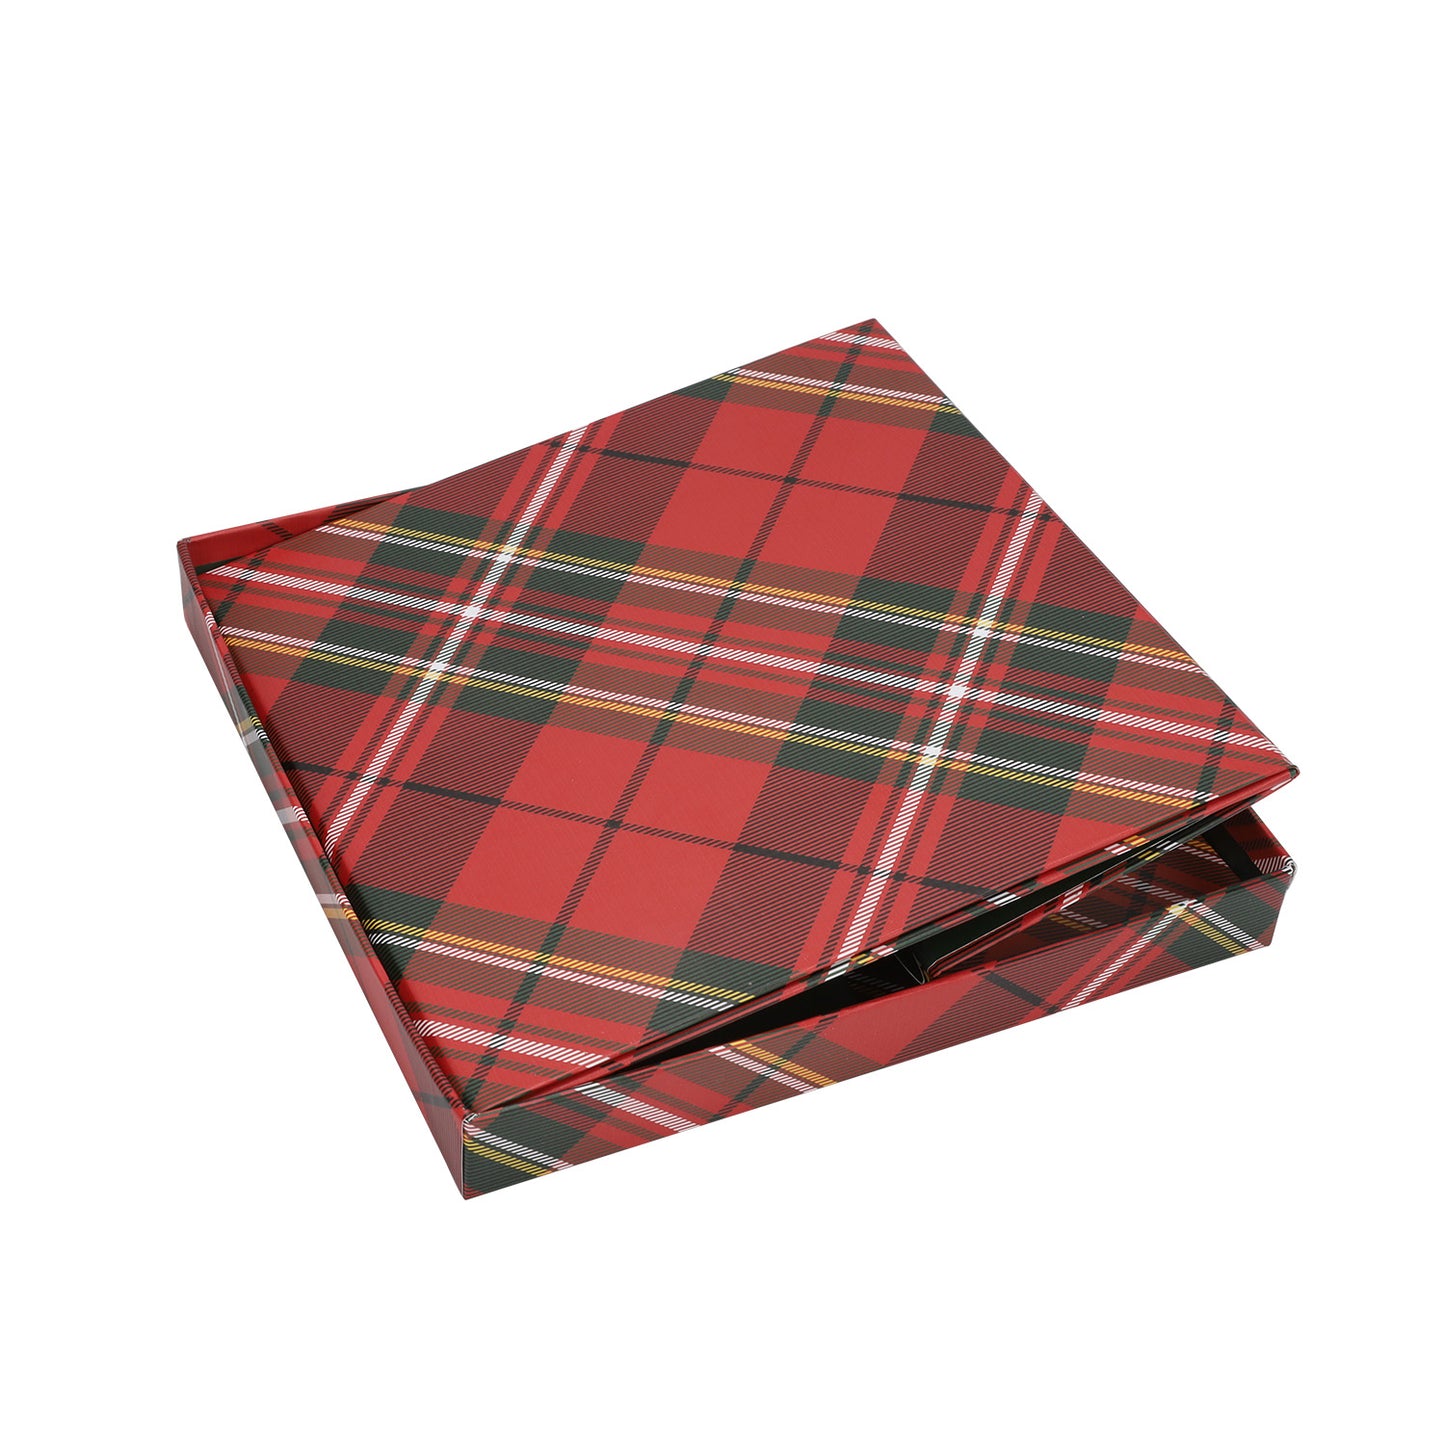 WRAPLA 23X23X23CM Christmas Gift Box with Lid Red Buffalo Plaid design for Party, Wedding, Gift Wrap, Bridesmaid Proposal, Storage